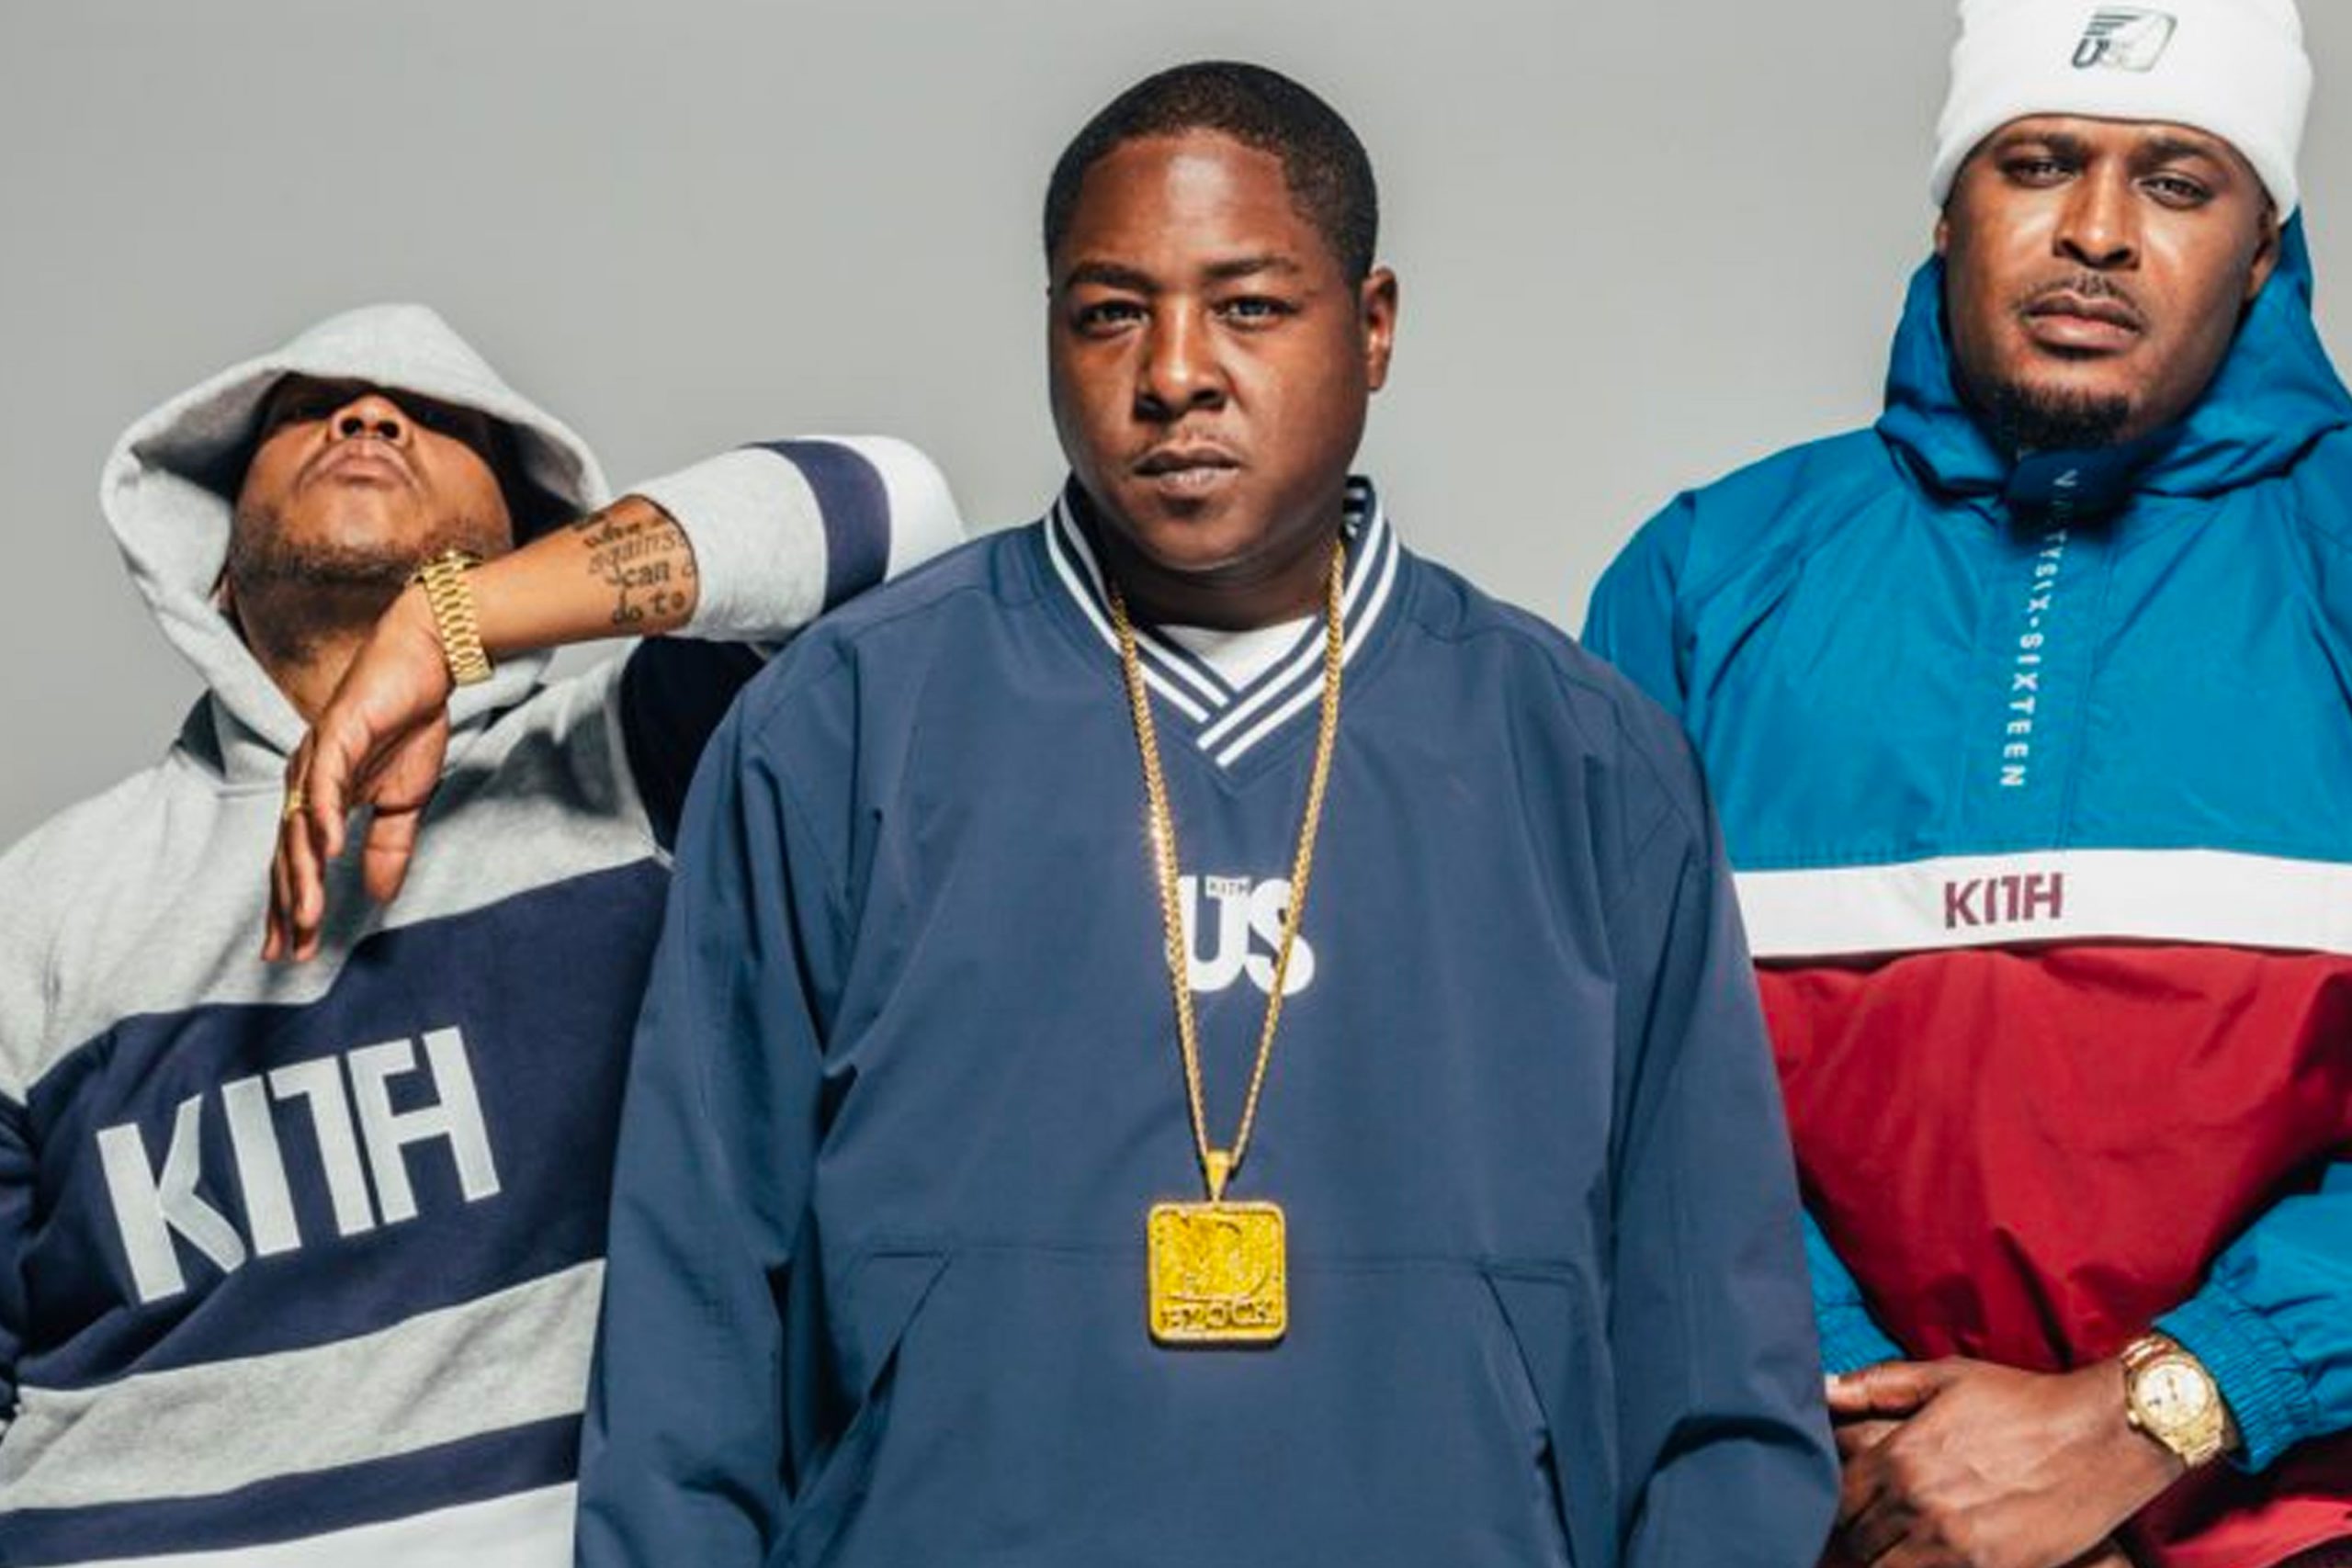 Group shot of The Lox